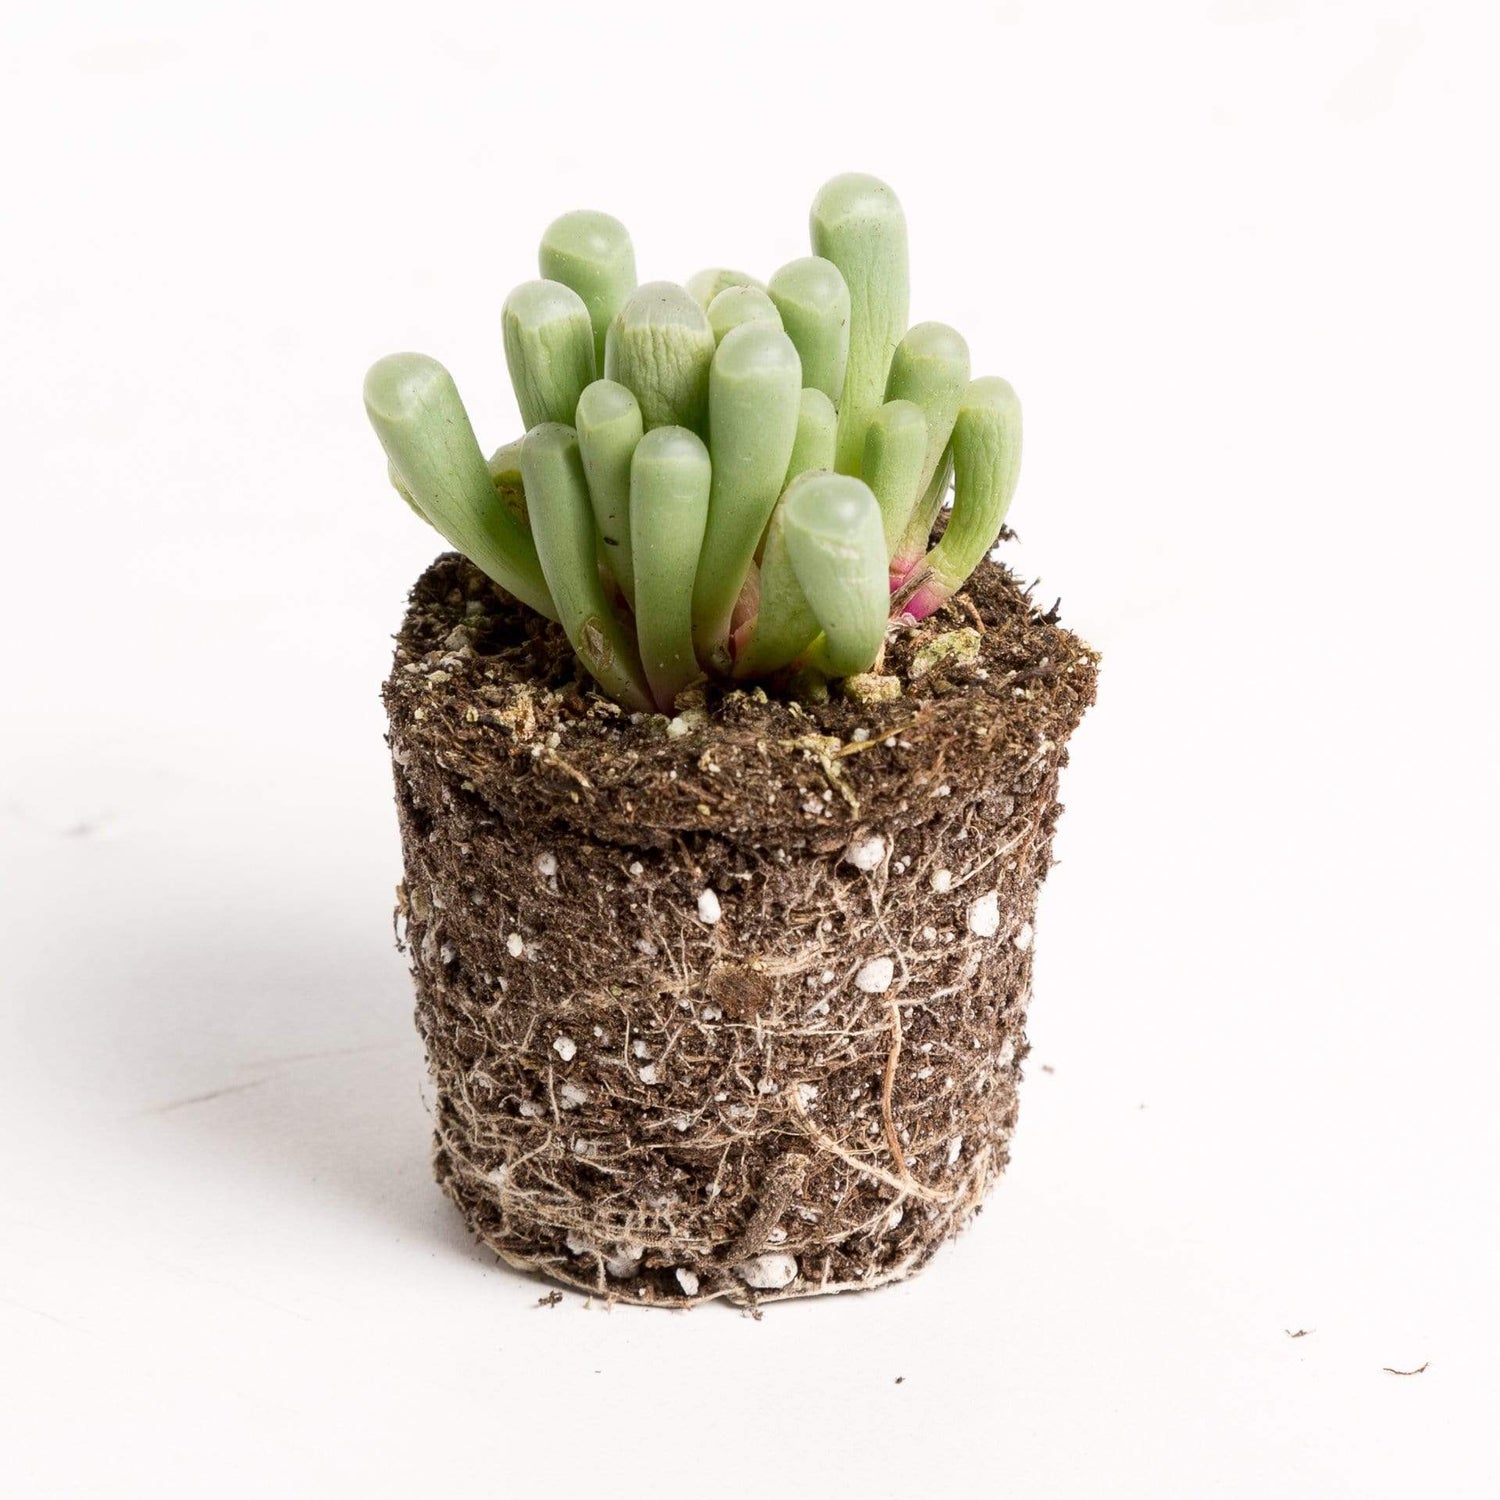 Urban Sprouts Plant 2" in nursery pot Succulent 'Baby Toes'